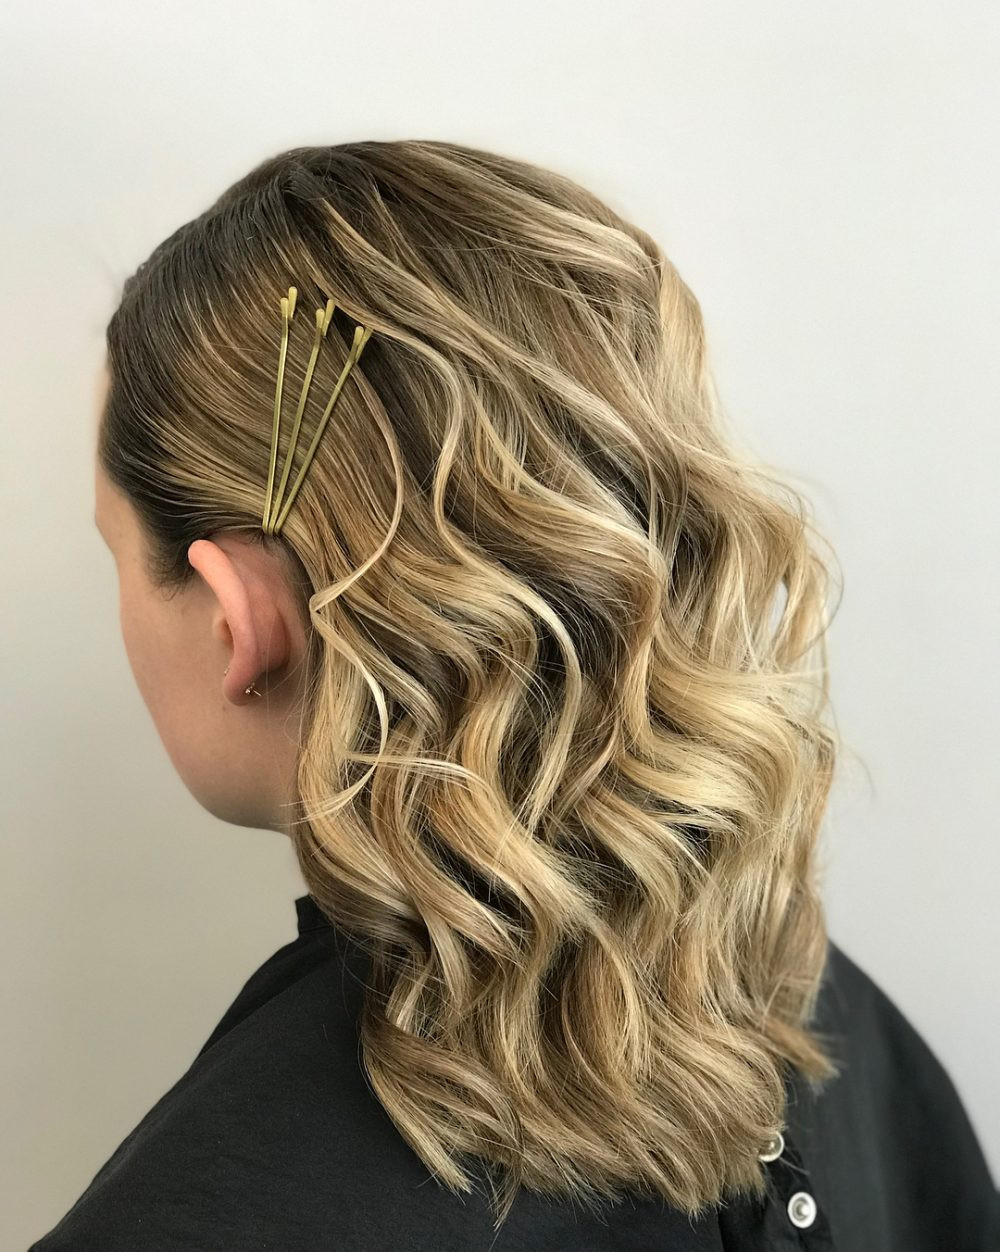 Prom Hairstyle
 20 Easy Prom Hairstyles for 2020 You Have to See